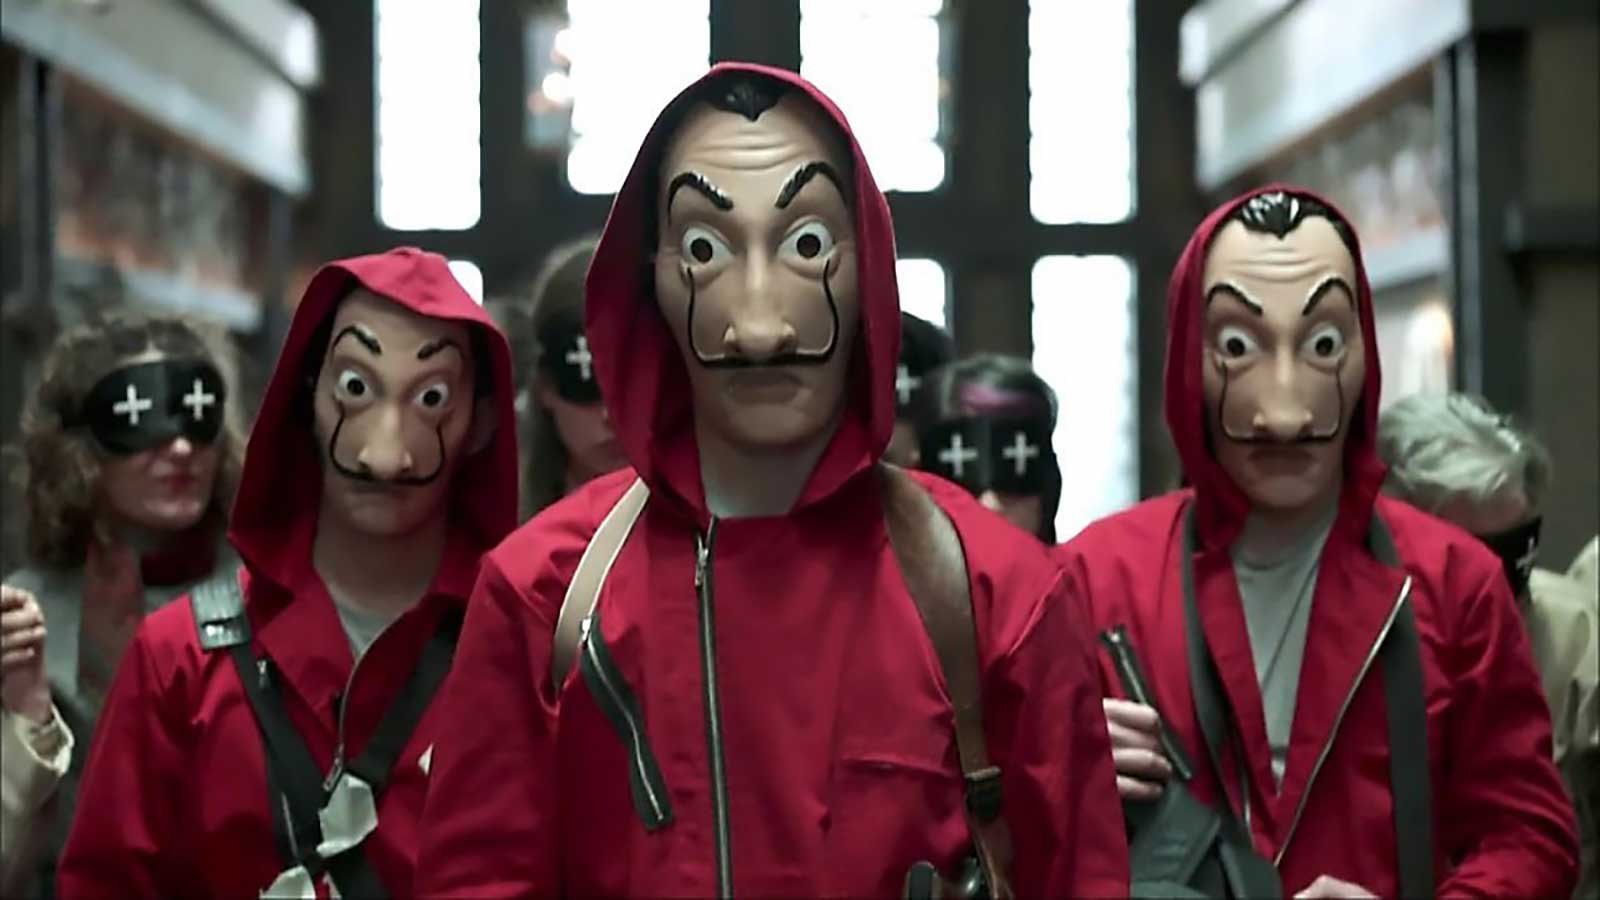 'Money Heist' was at the top of its game when Netflix took over the show for season 3. But it's clear that this show no longer is about a heist anymore. 